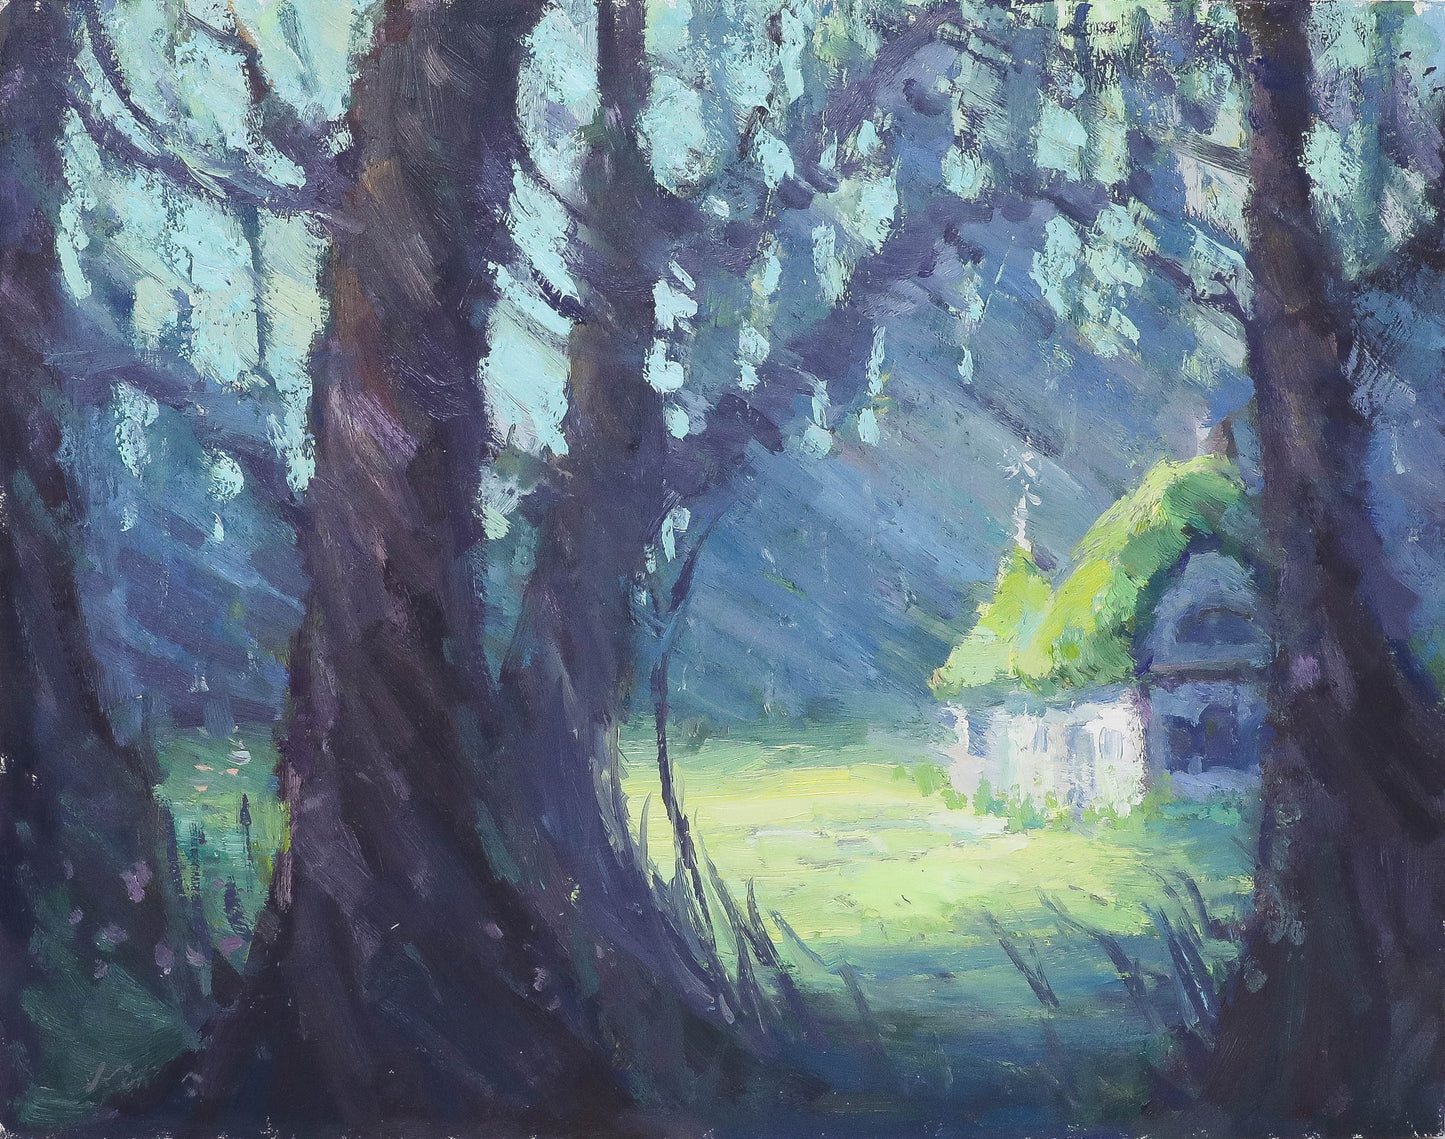 "Deep in the Forest" 11x14 Original Oil Painting by Artist Kristina Sellers